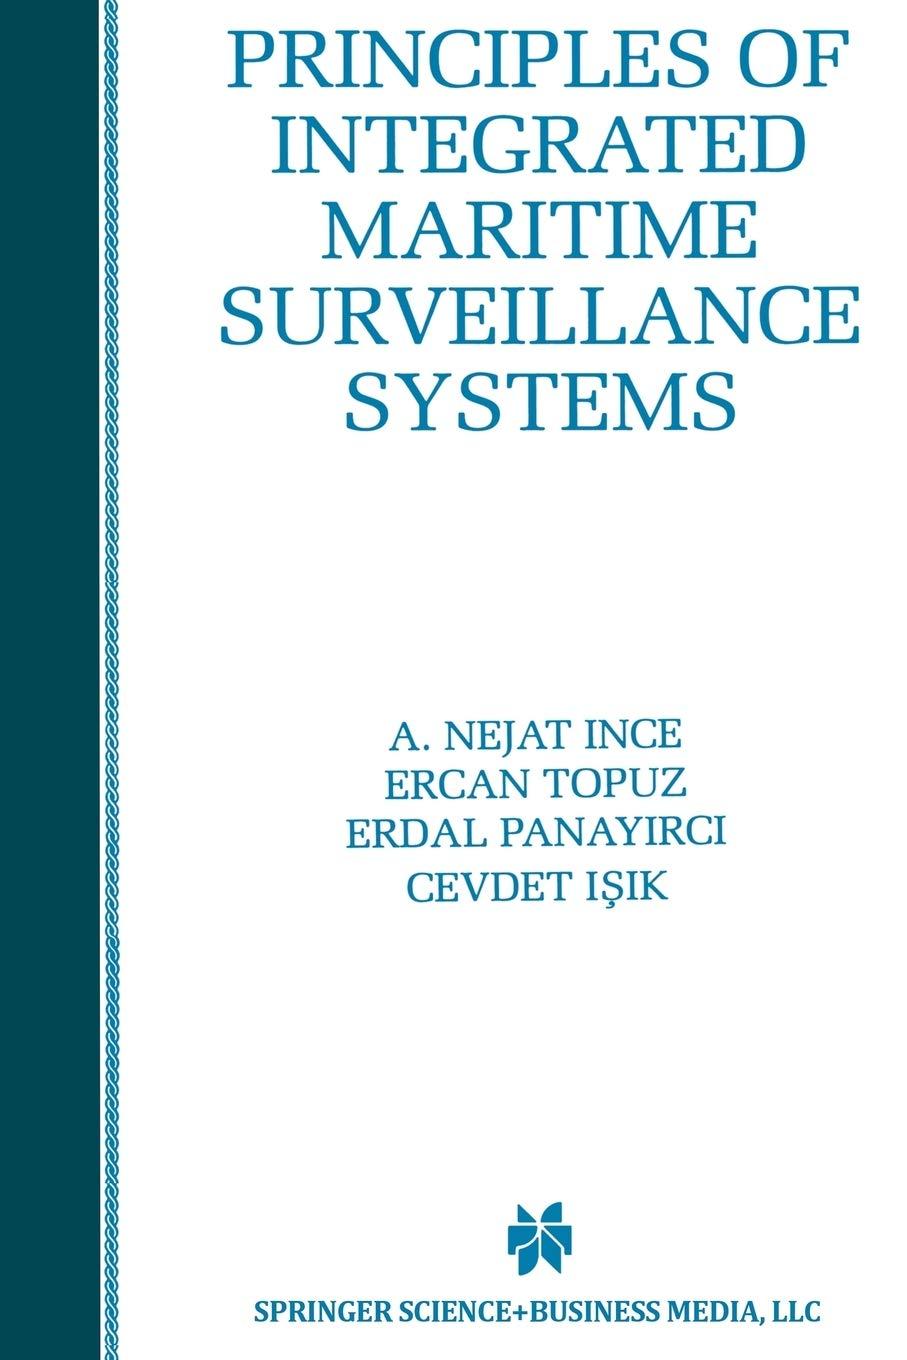 principles of integrated maritime surveillance systems 1998 edition a. nejat ince, ercan topuz, erdal